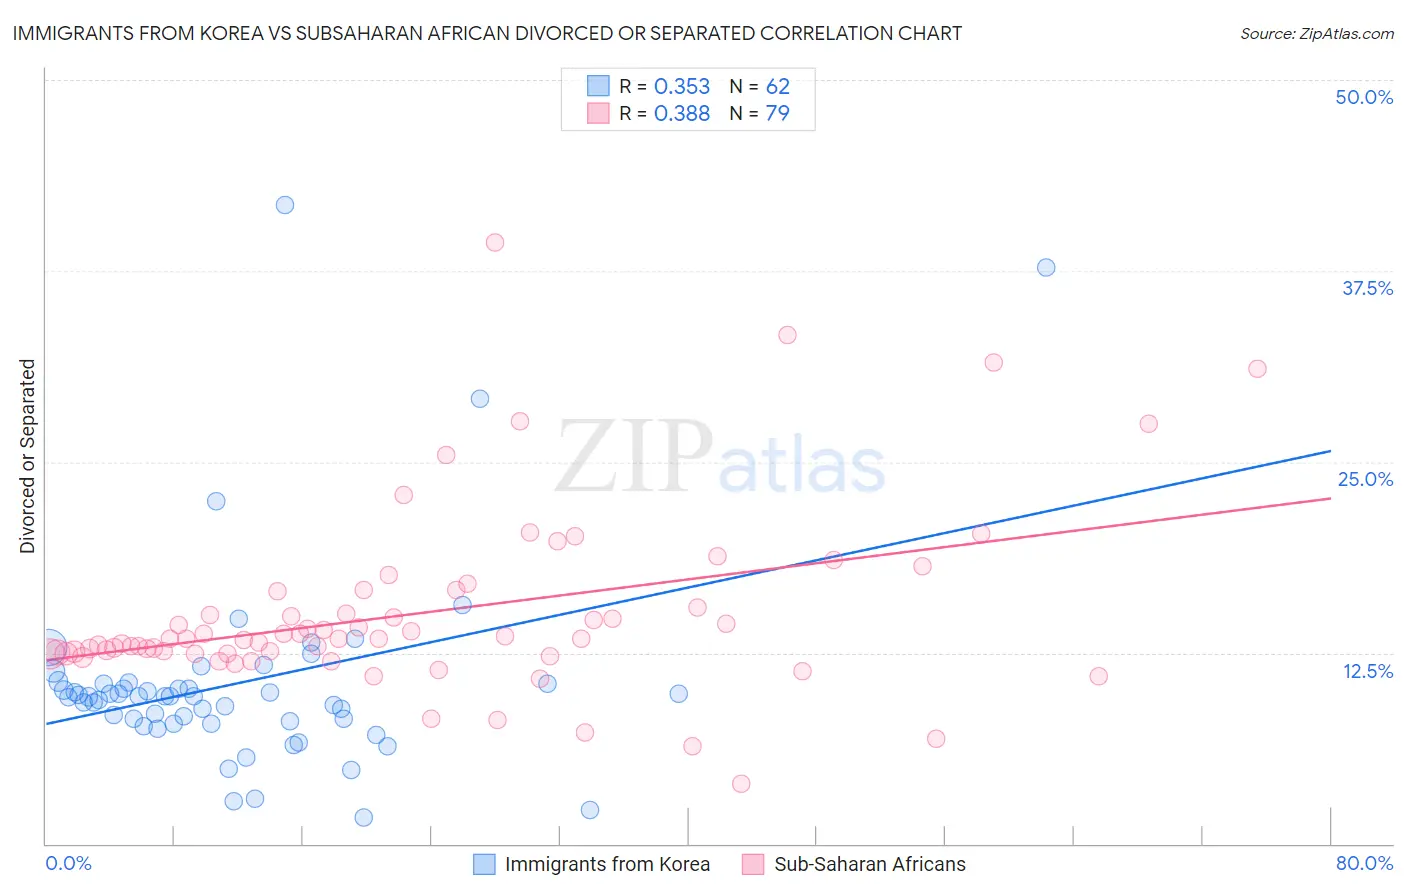 Immigrants from Korea vs Subsaharan African Divorced or Separated